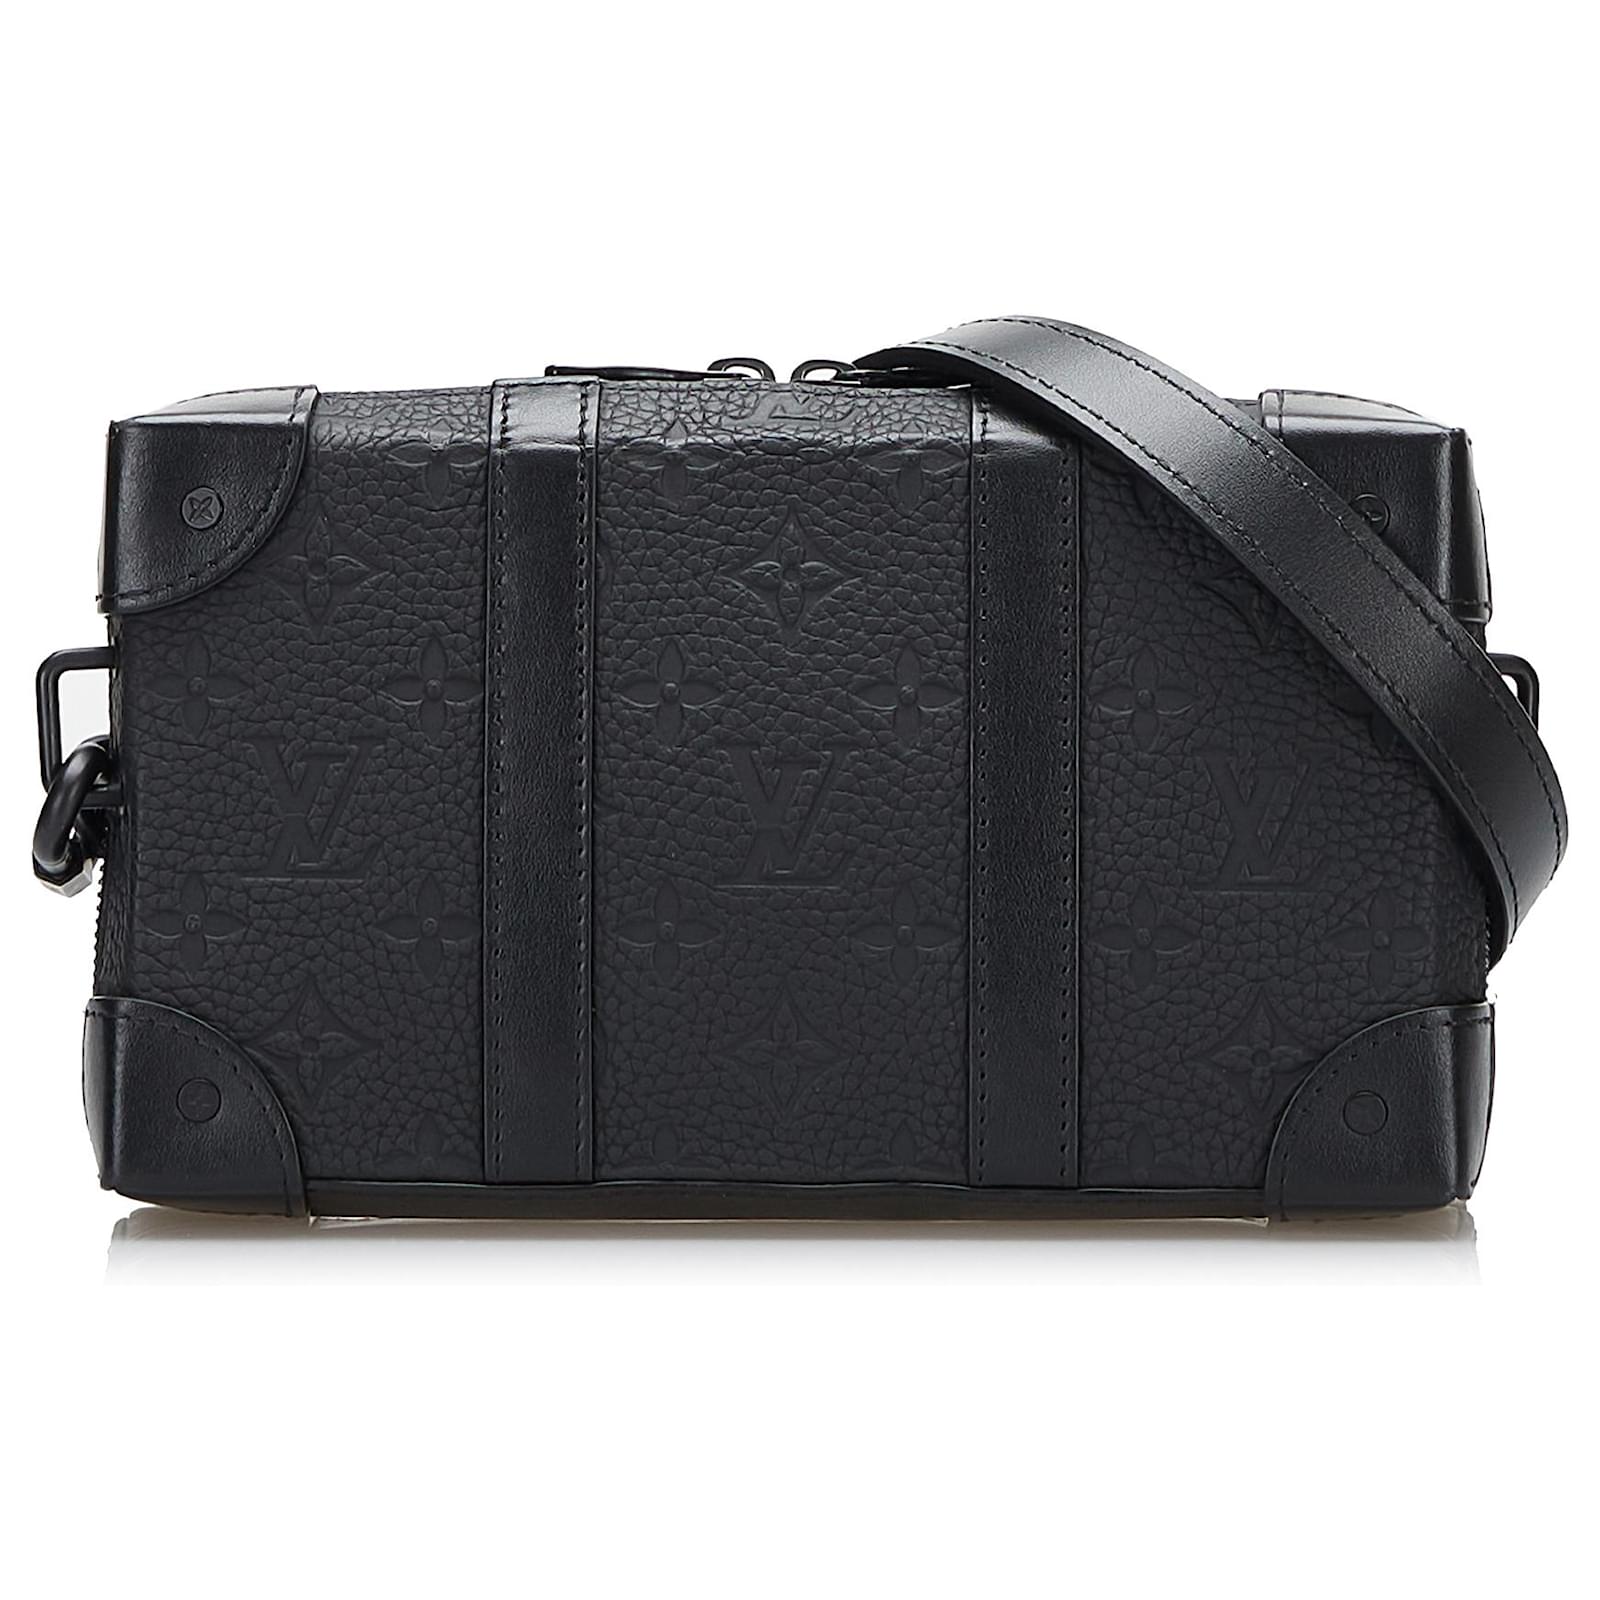 Louis Vuitton Soft Trunk Wallet in Taurillon Leather with White